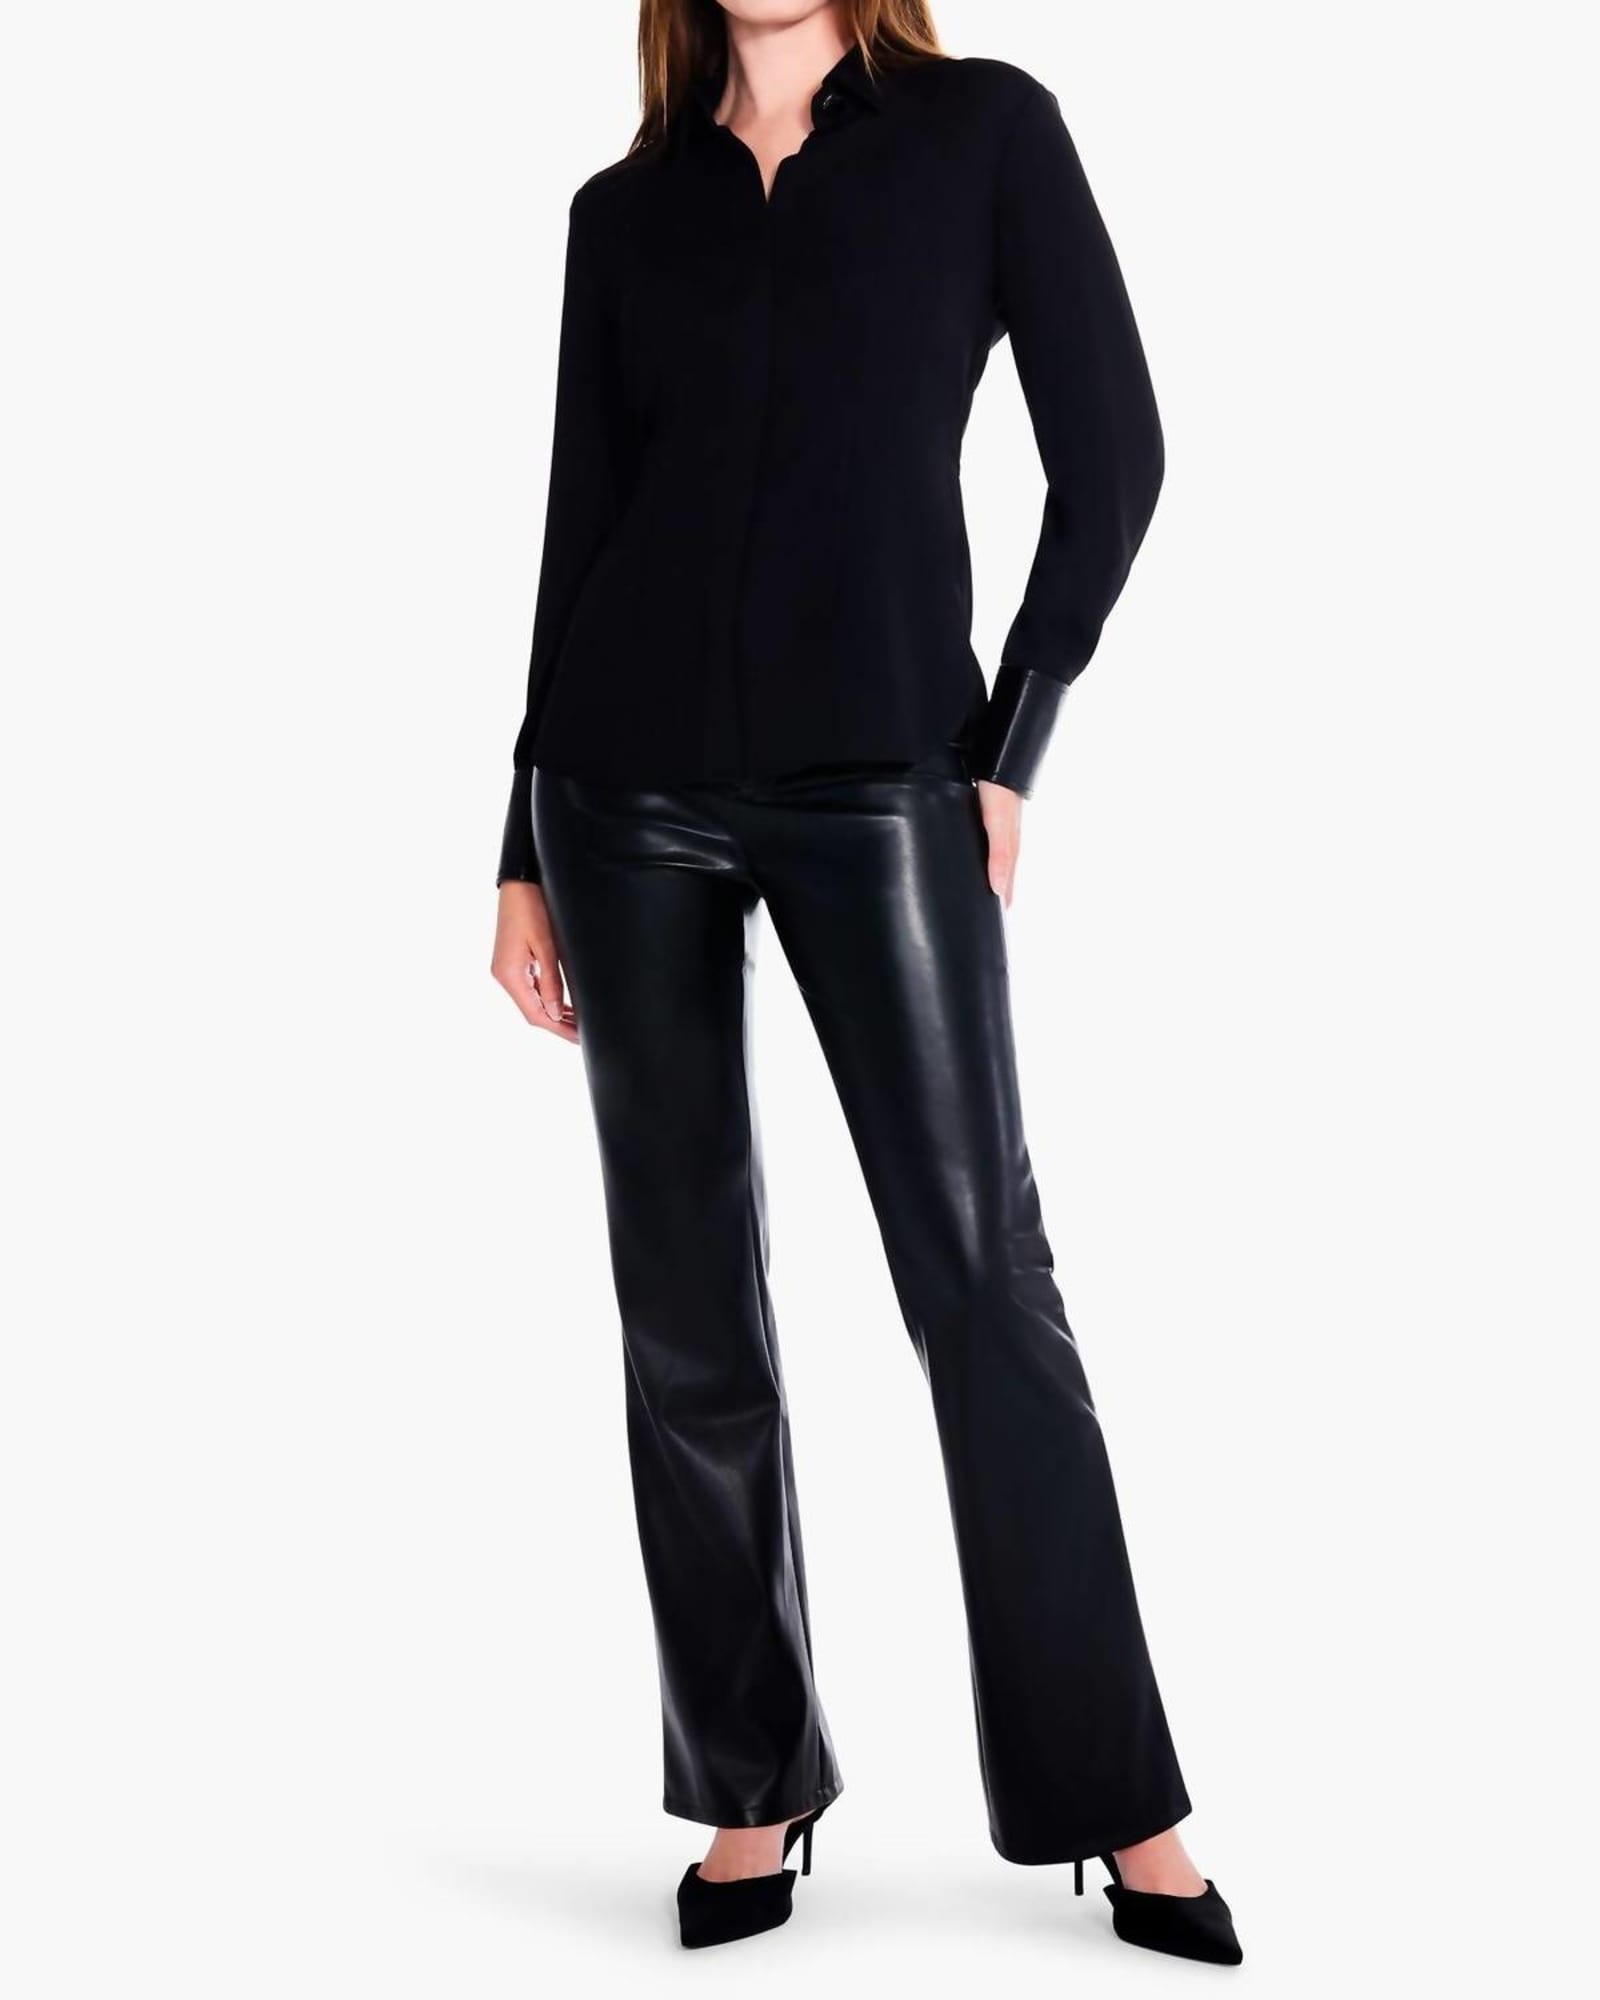 Faux Leather Bootcut Pant in Black Onyx | Black Onyx